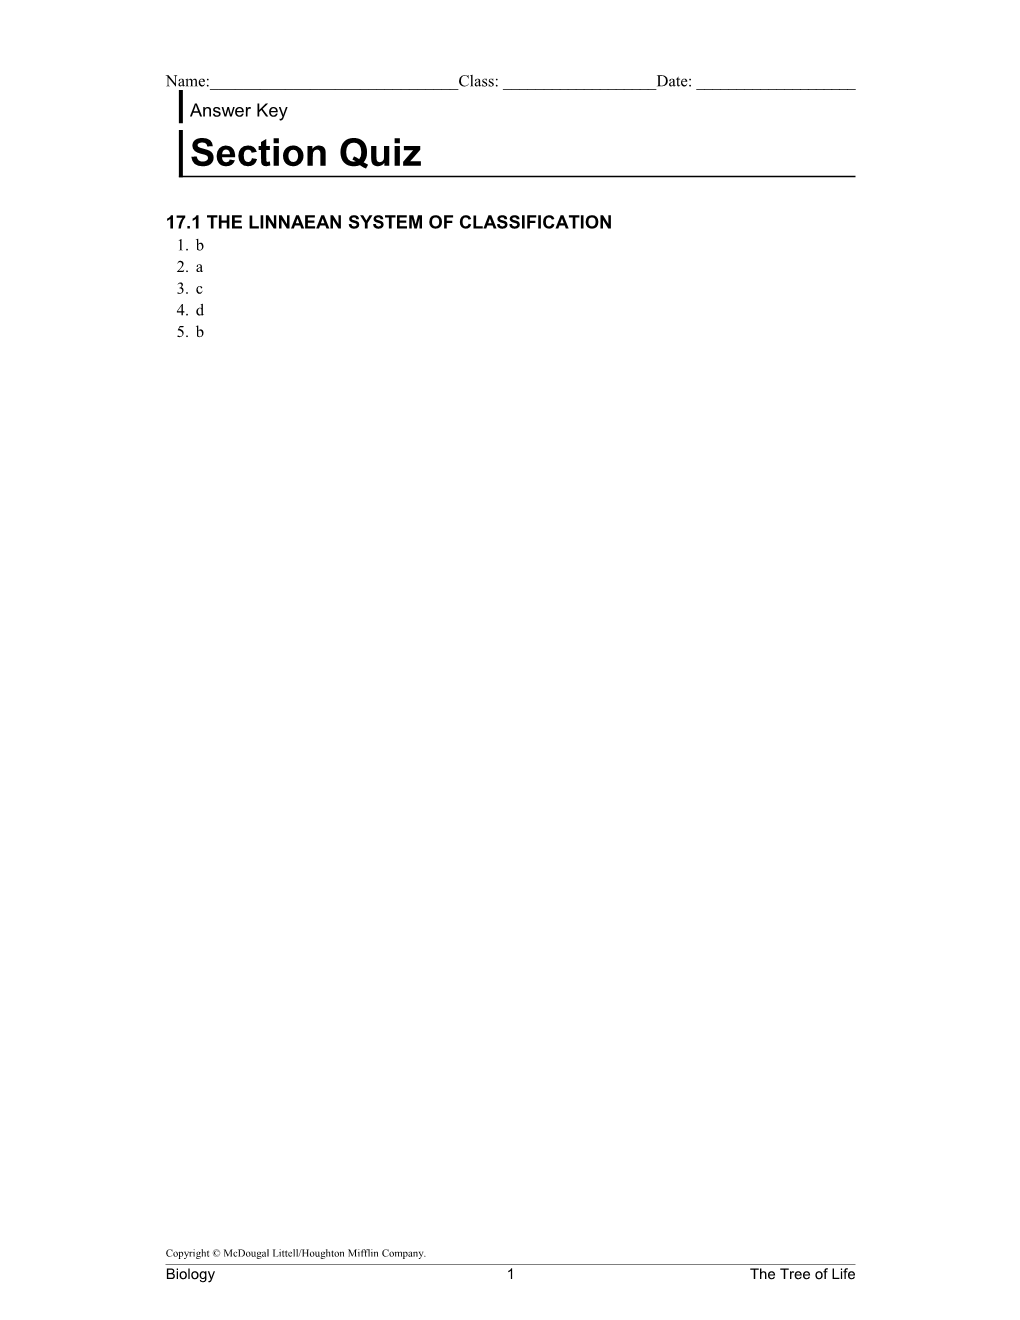 17.1 the Linnaean System of Classification s1